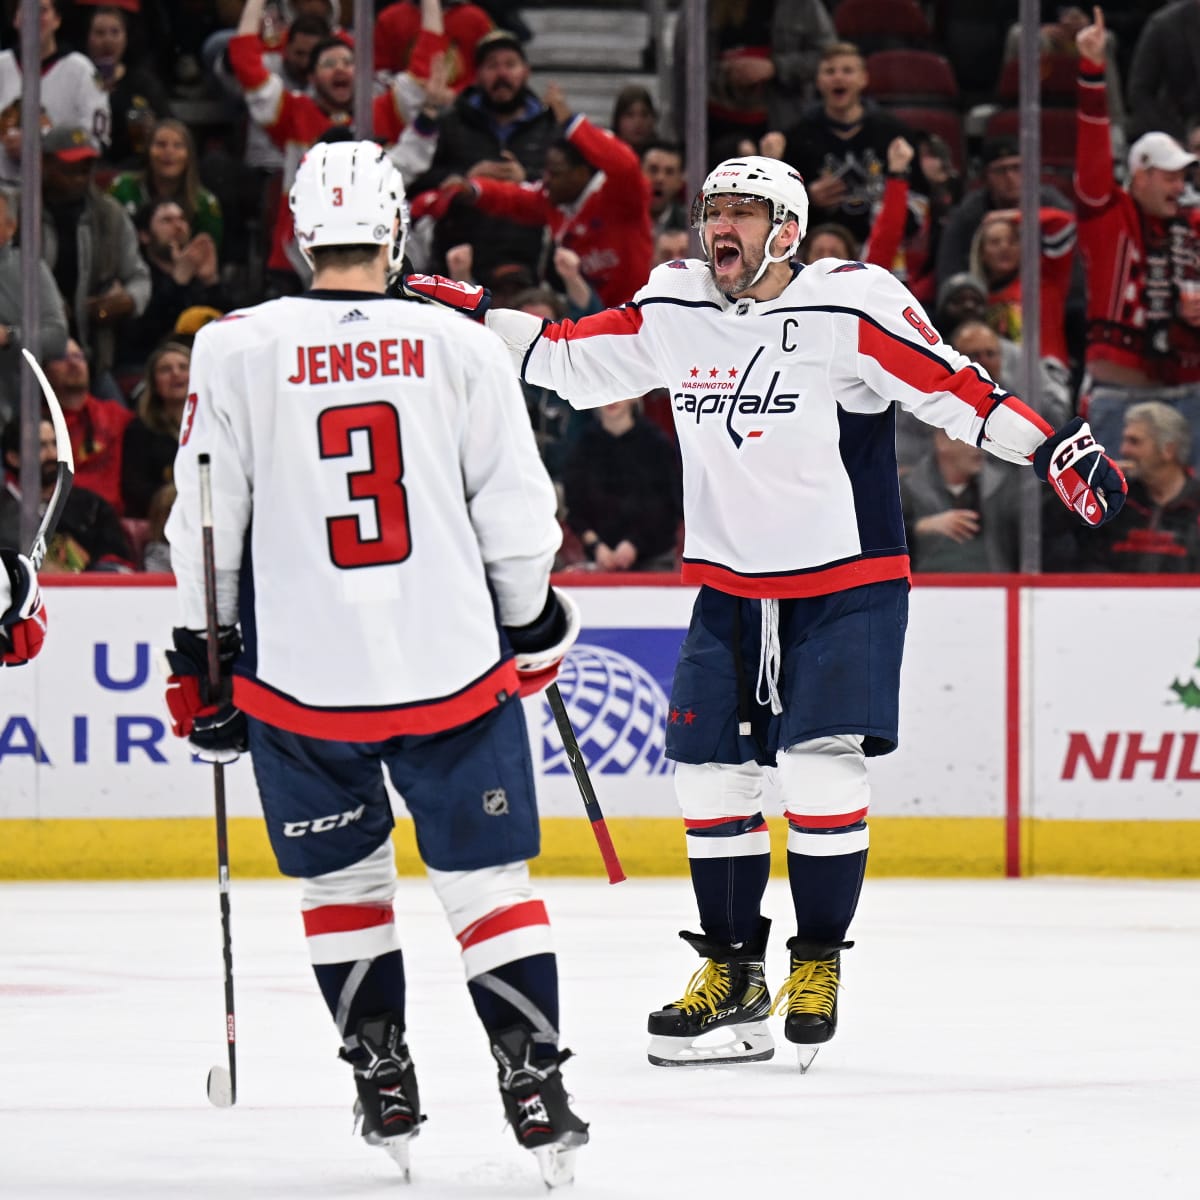 Captials' Alex Ovechkin tied another NHL mark against Flyers